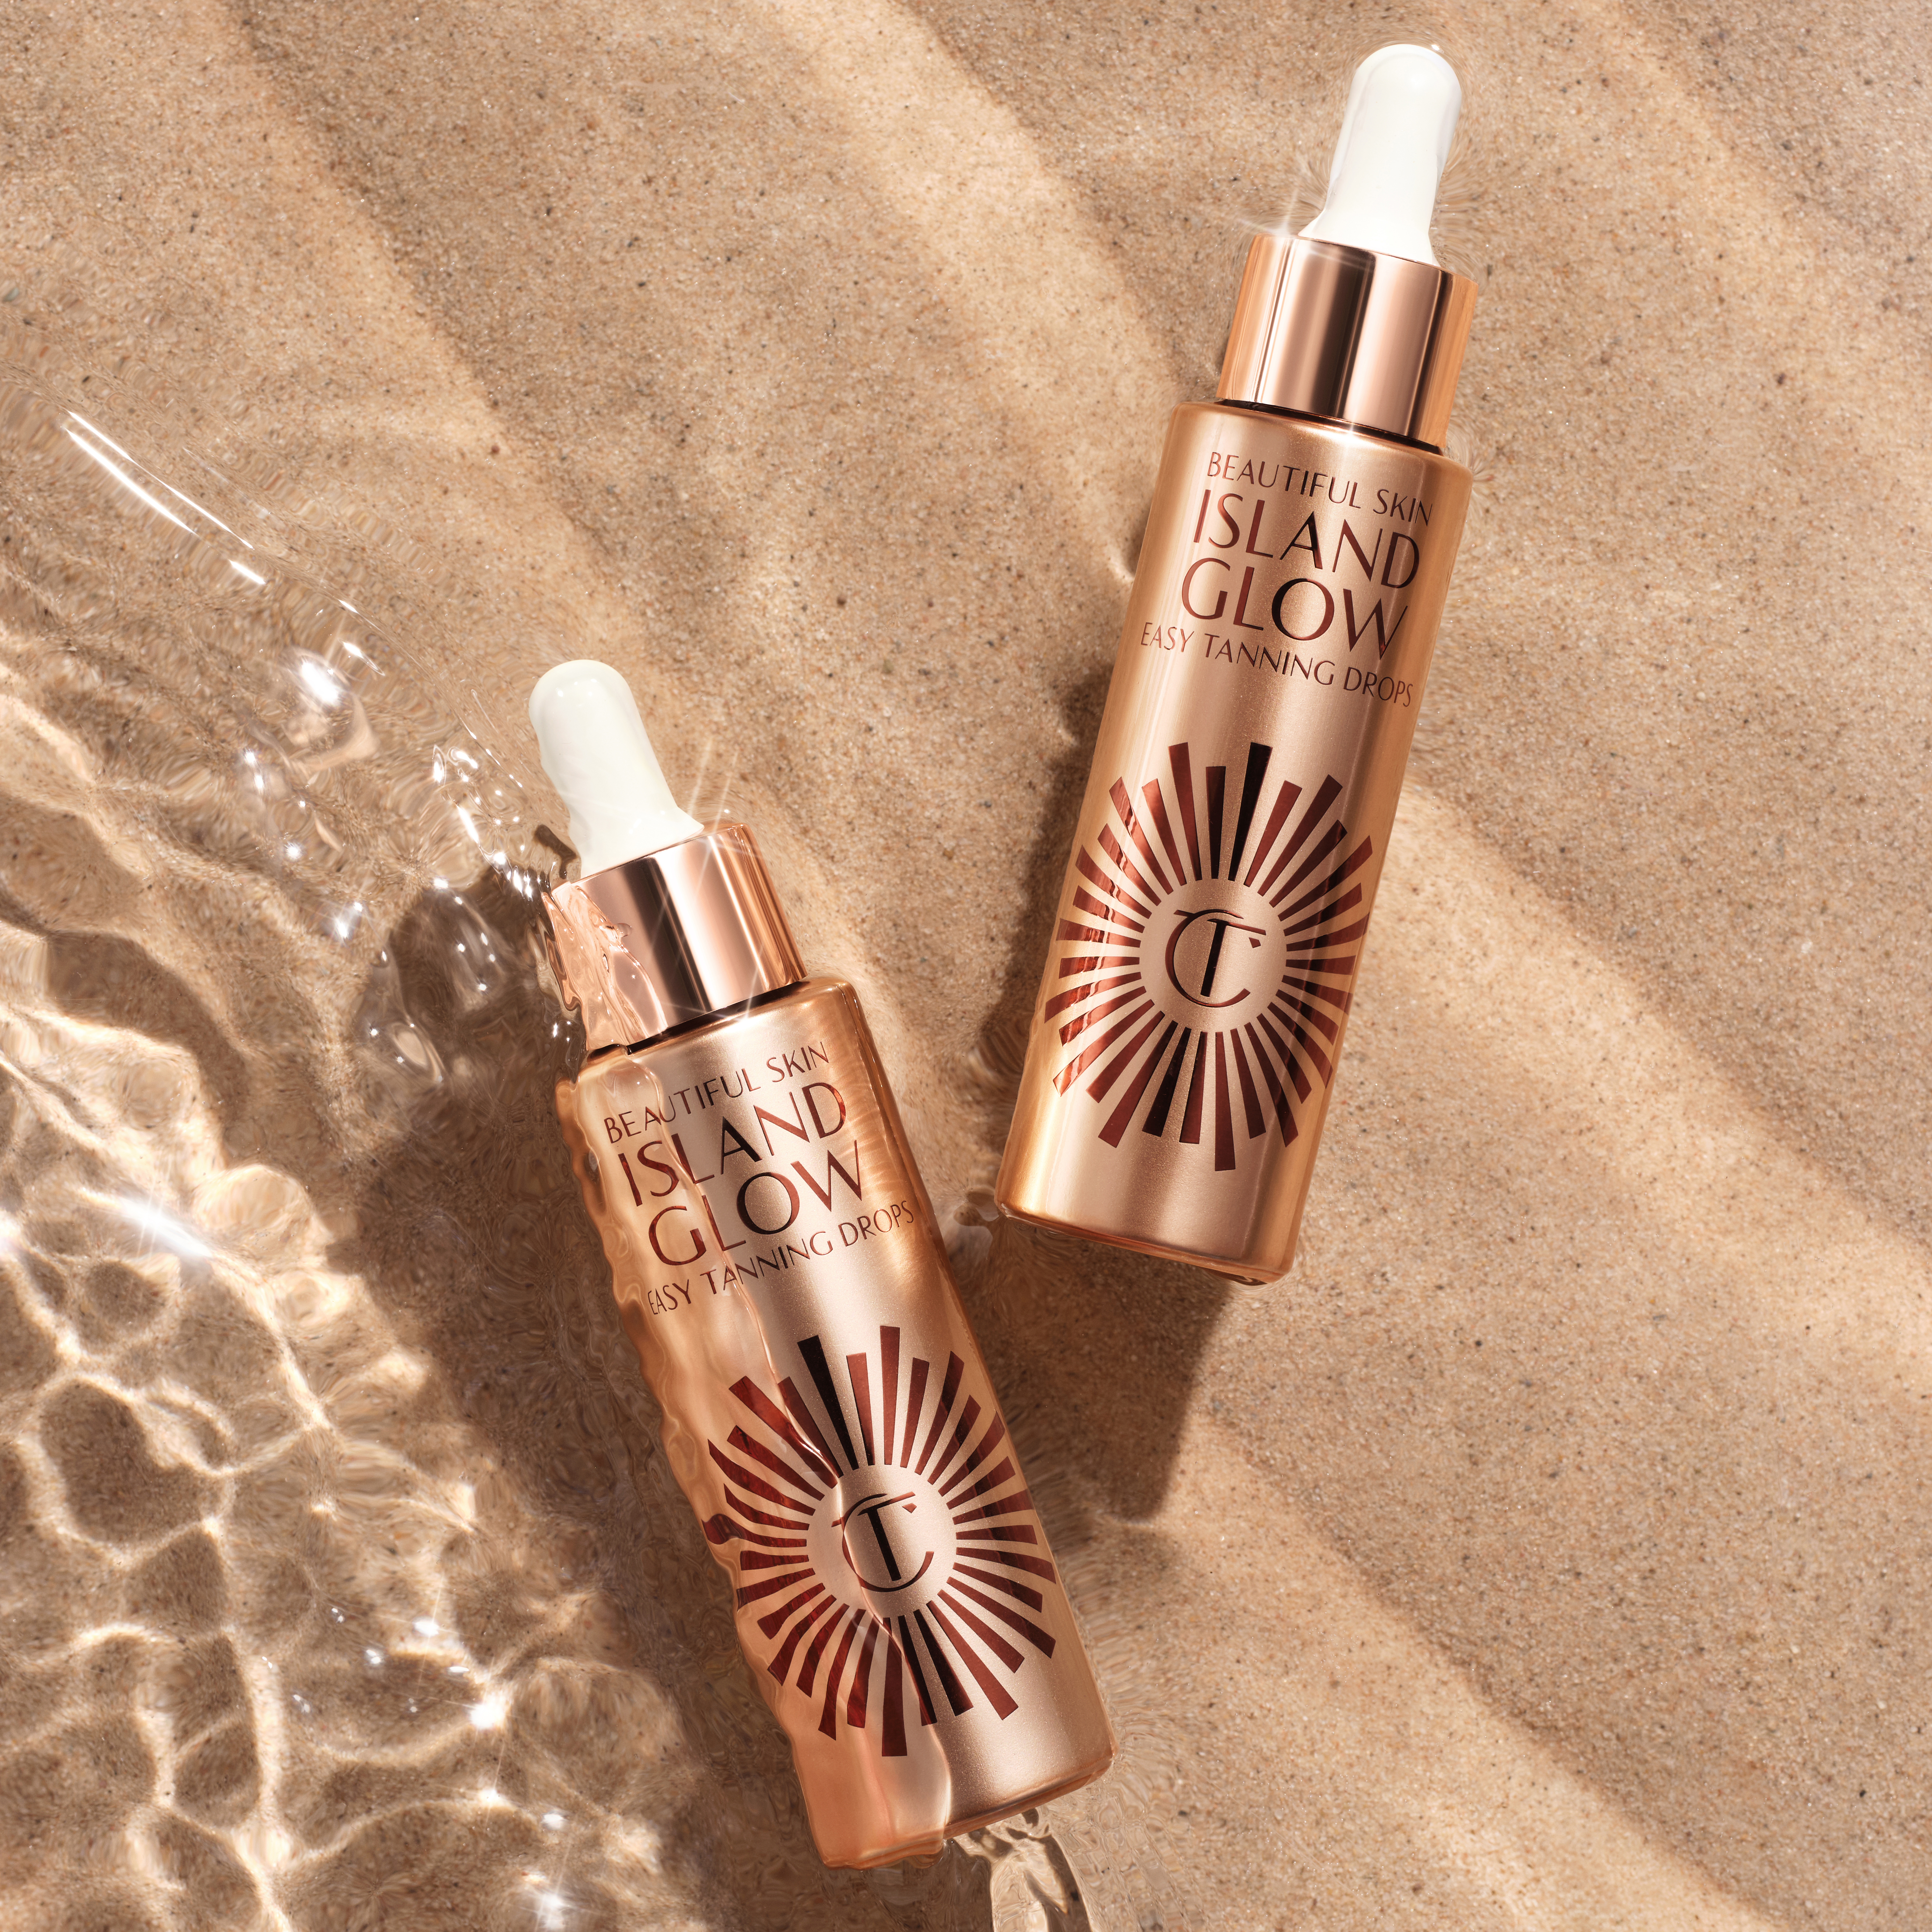 Charlotte's Beautiful Skin Island Glow Easy Tanning Drops placed in the sand